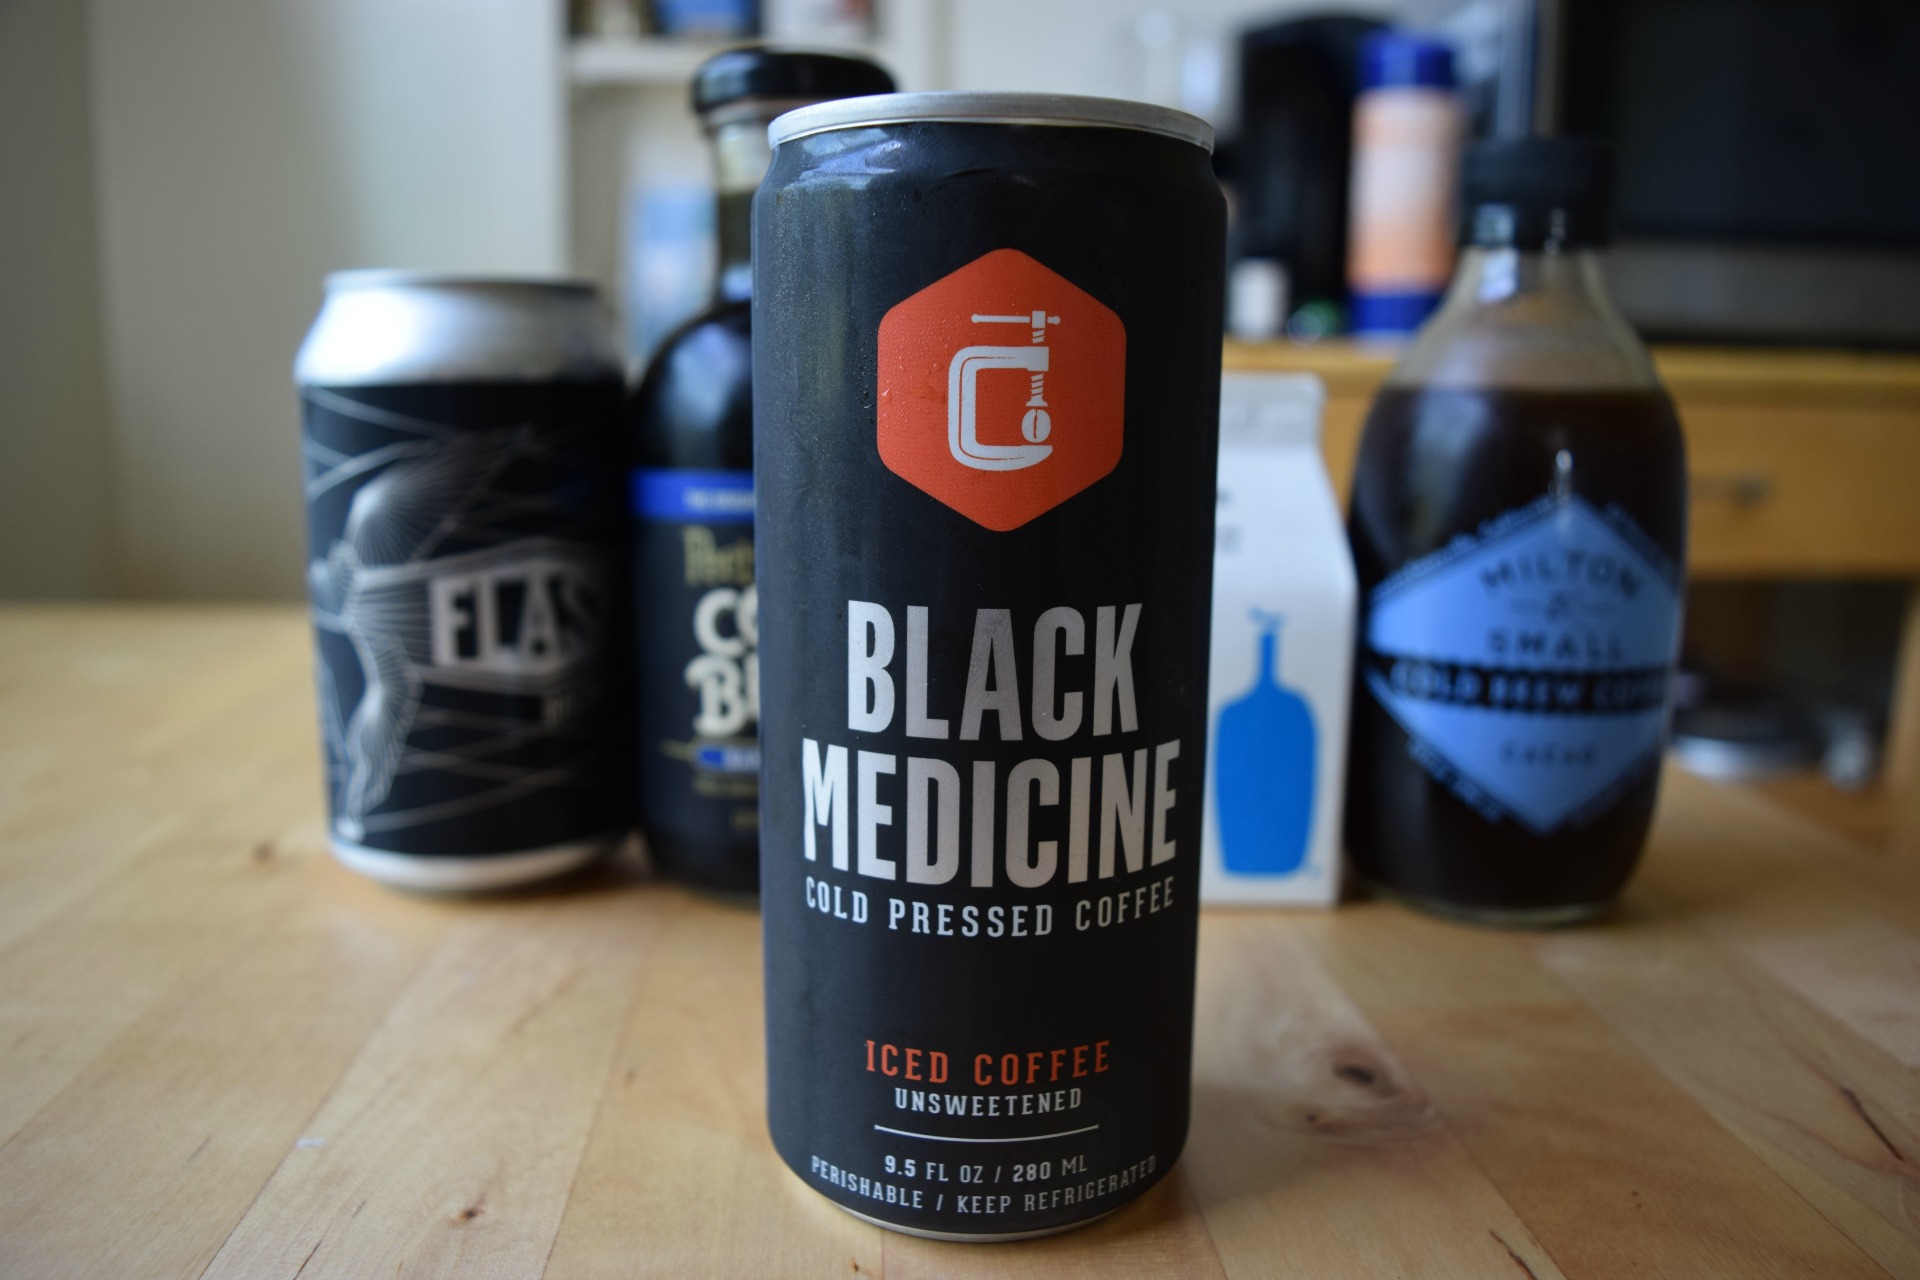 Iced coffee from Oakland's Black Medicine.